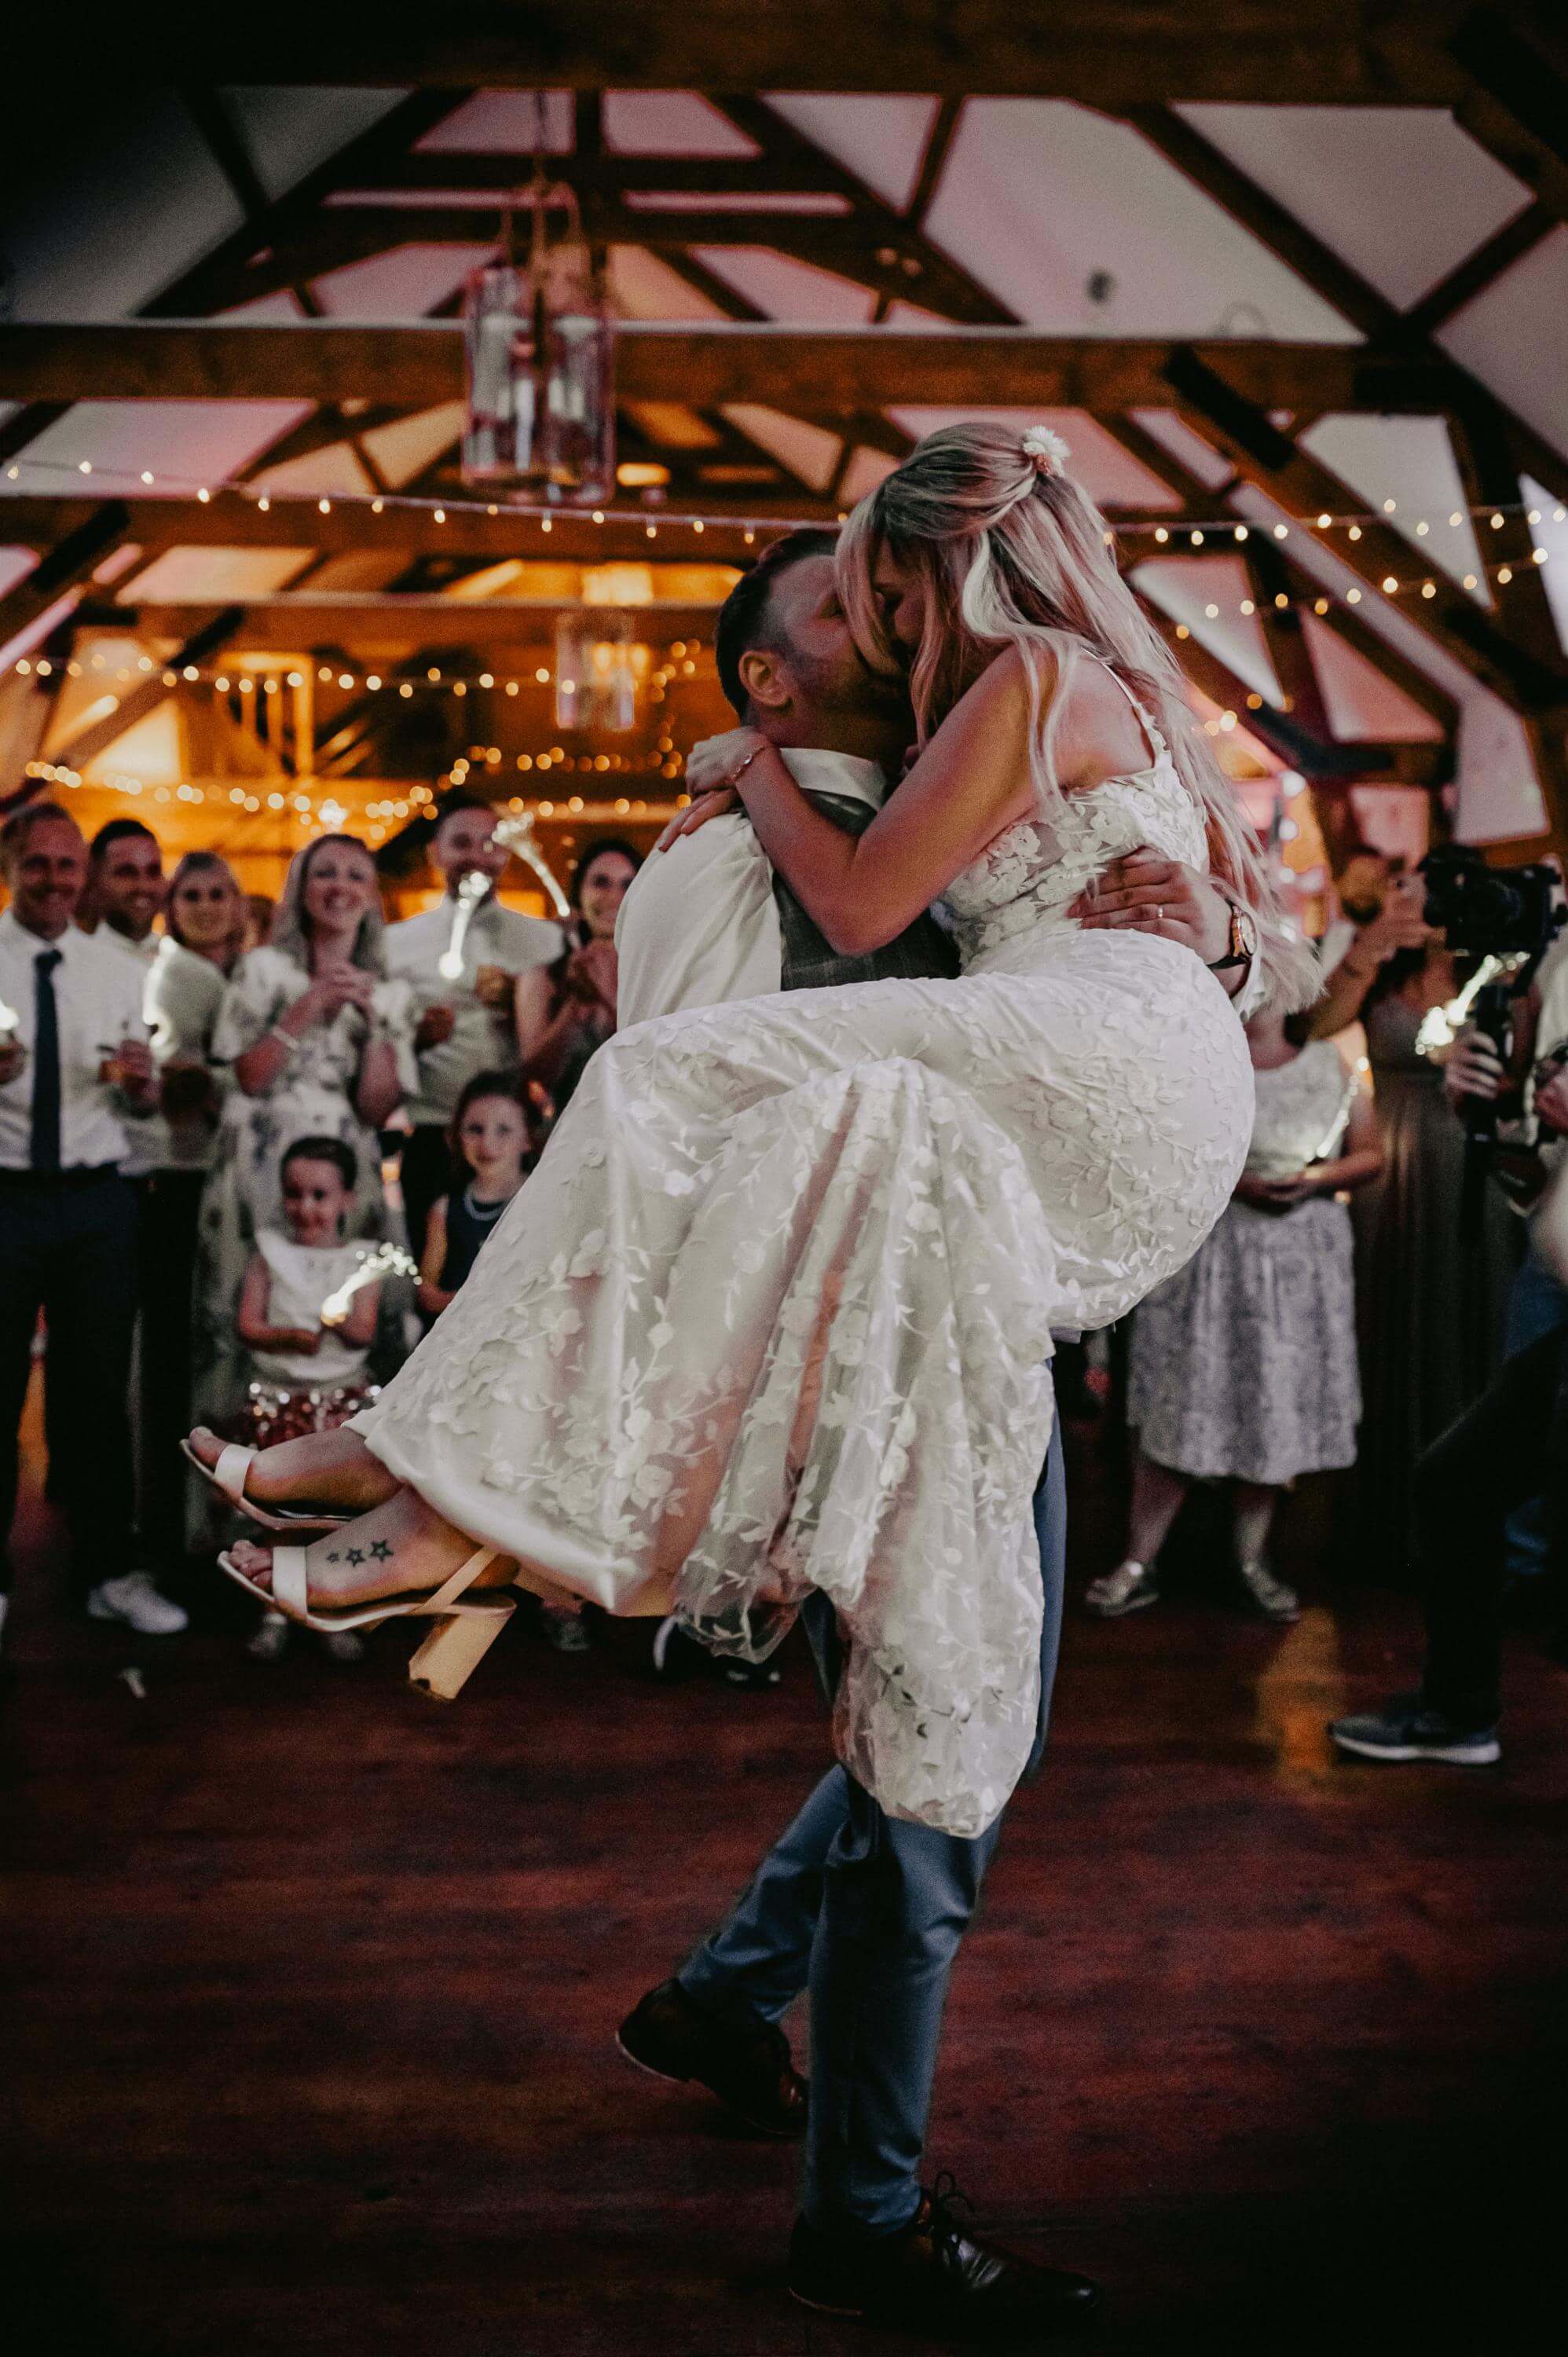 During the couple dance in the romantically decorated barn with fairy lights, the wedding couple dances in the midst of the wedding party. He carries her in his arms and they kiss happily.